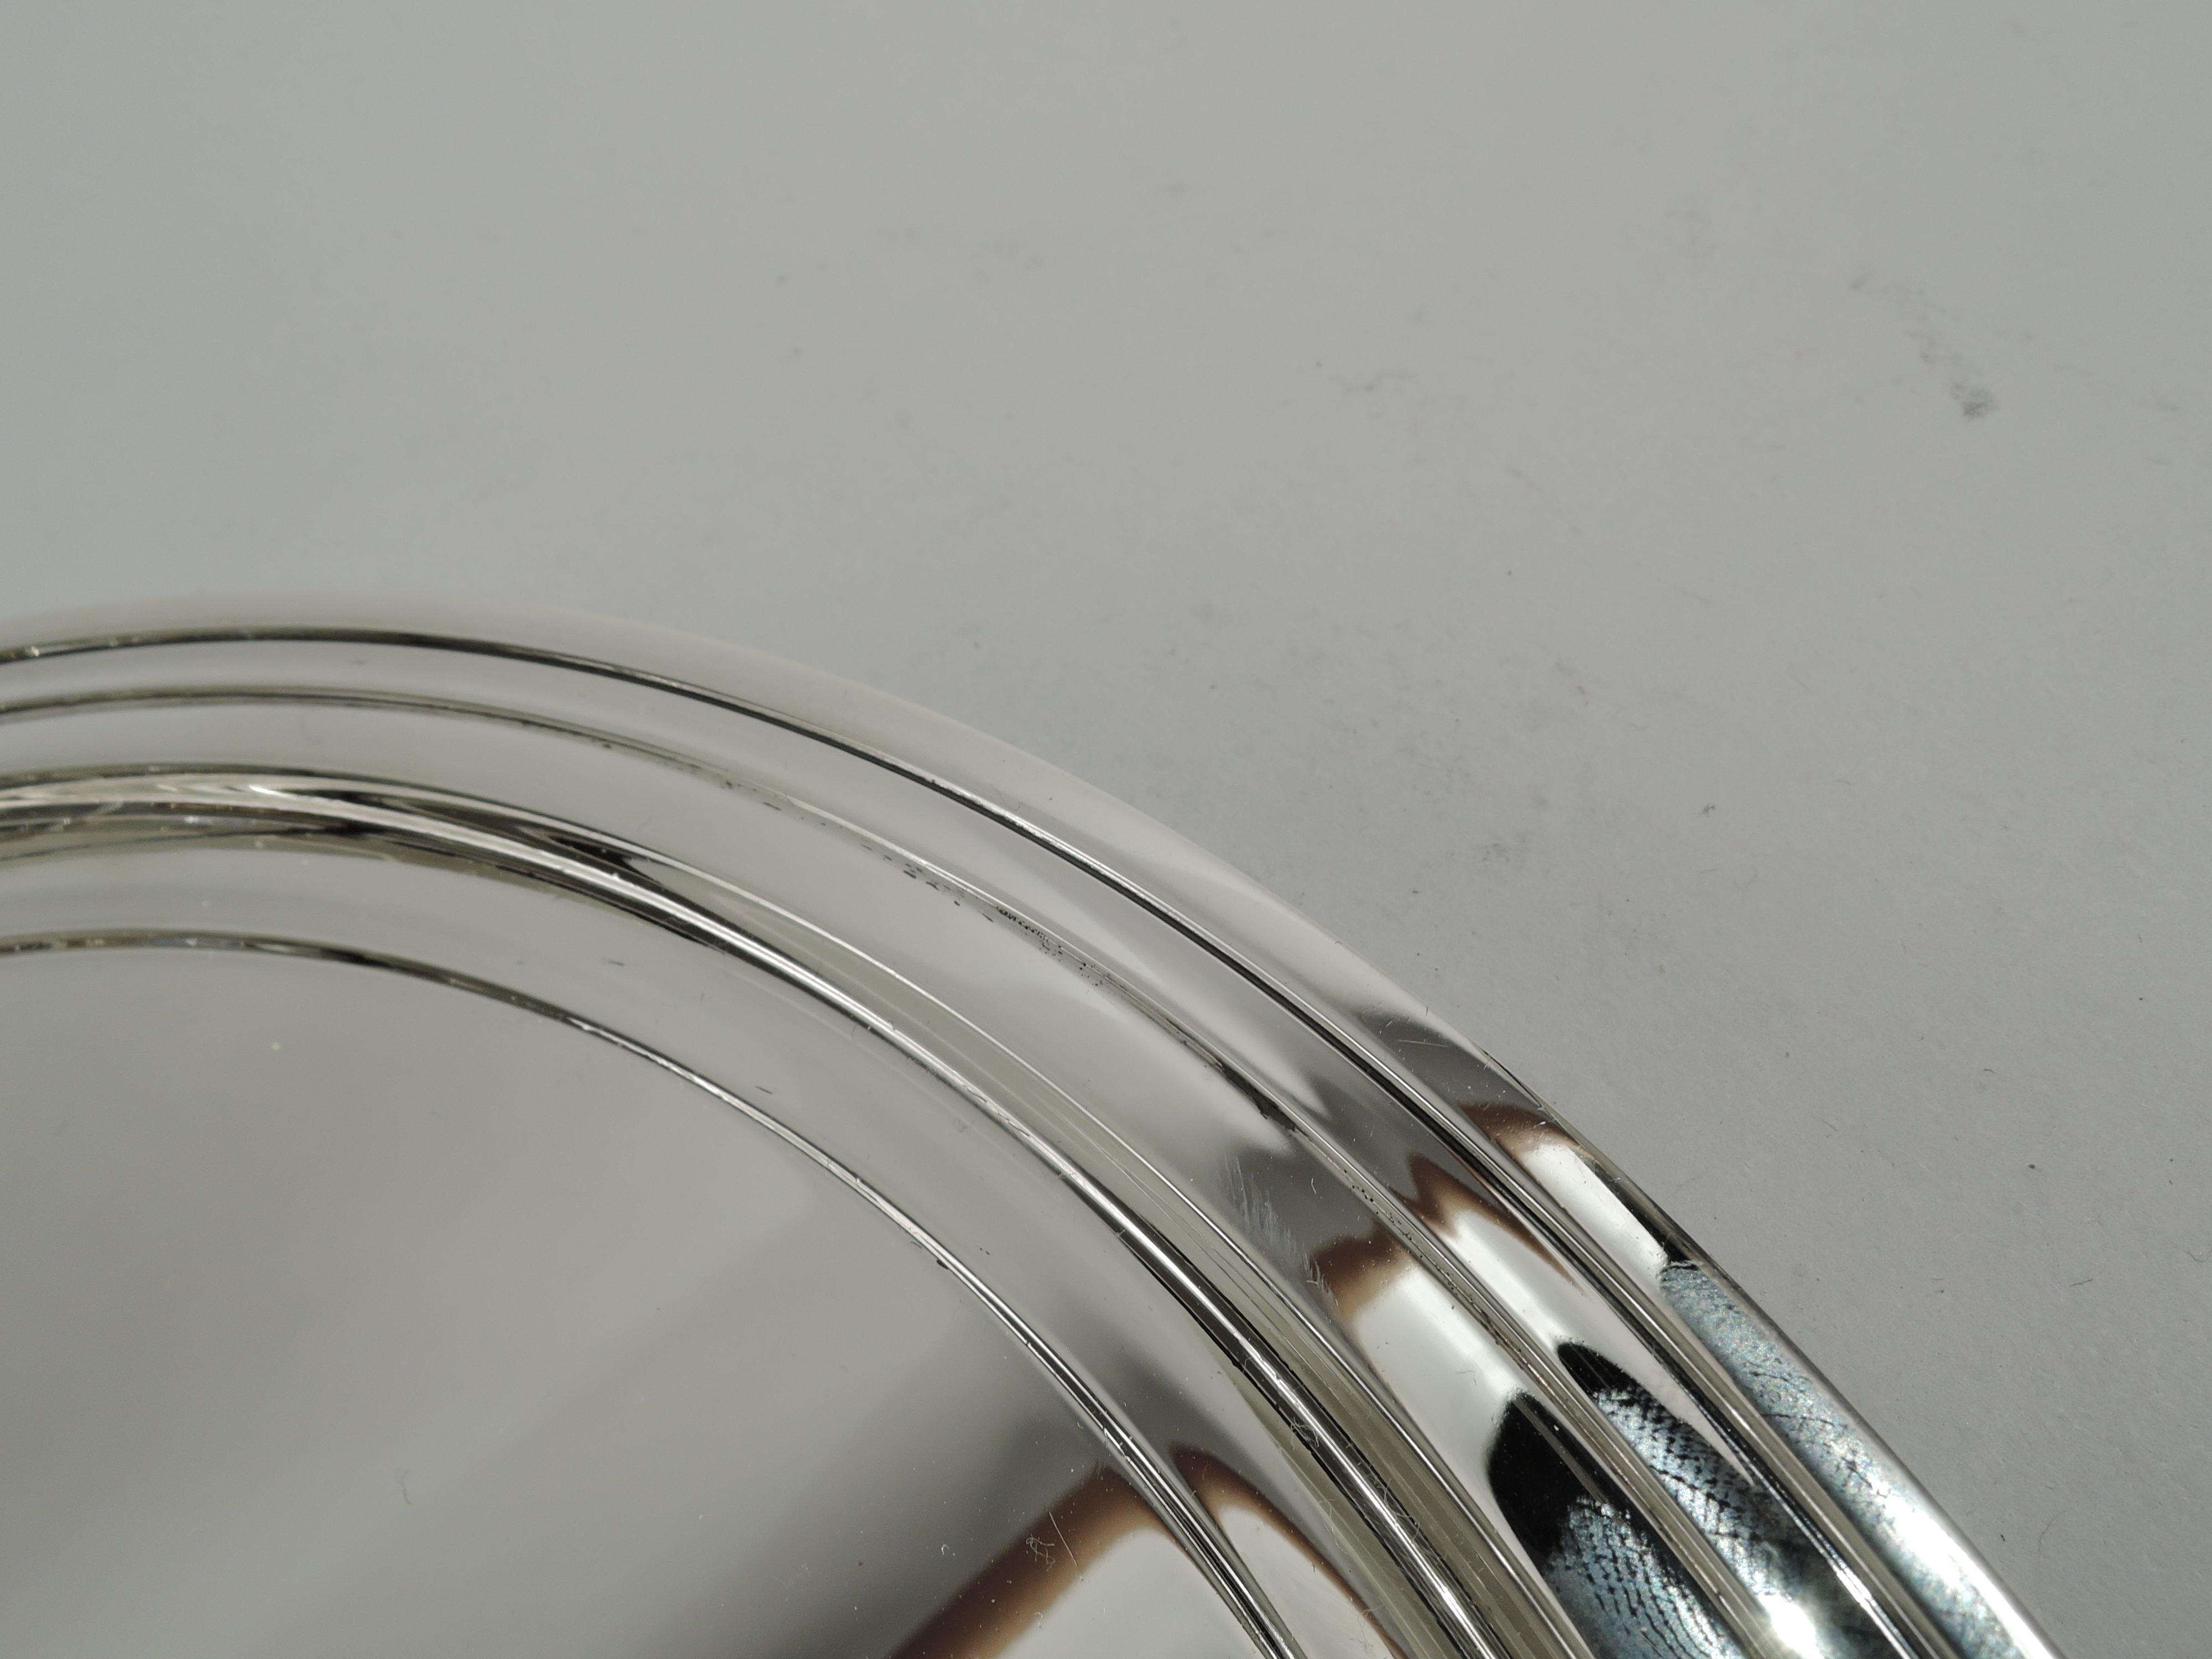 Modern sterling silver serving tray. Made by Tiffany & Co. in New York. Round with stepped rim. Smart and functional with nice heft. Fully marked including maker’s stamp, pattern no. 21252, director’s letter m (1907-47), and wartime star (1943-5).